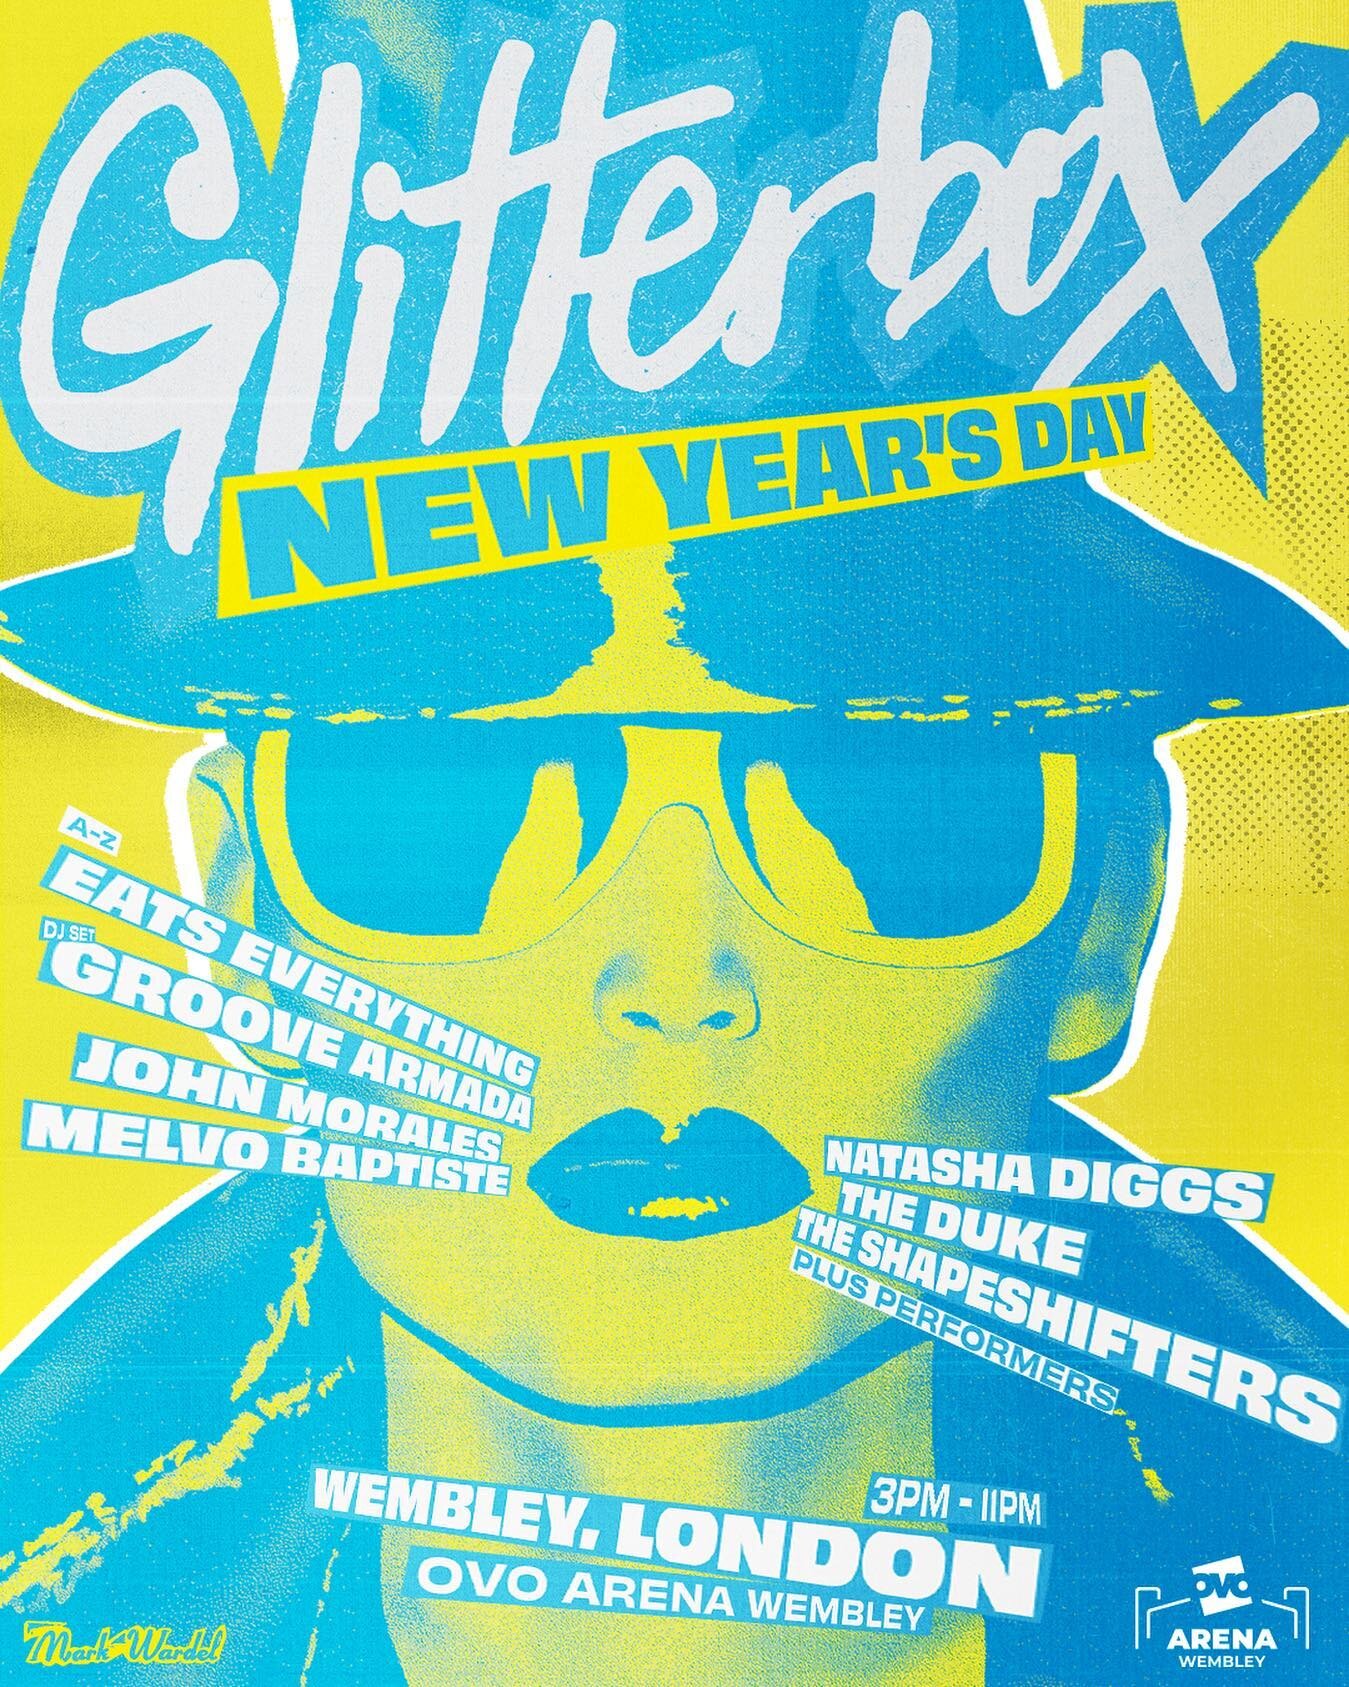 A good ol fashioned NYD session with the @defectedrecords and this tasty line up #glitterbox #wembley 

Let&rsquo;s go